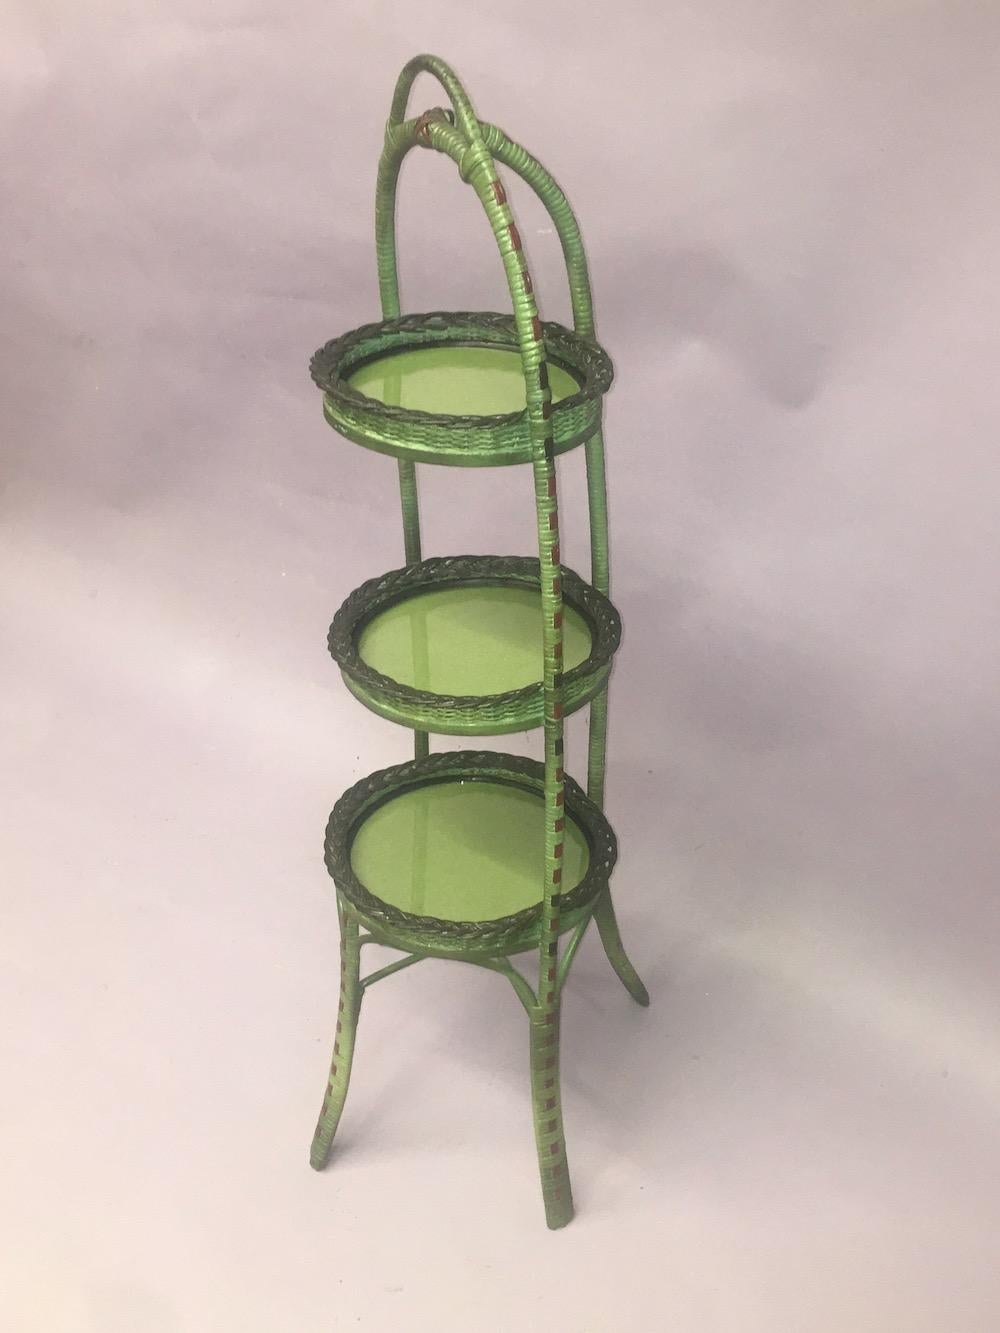 Other A Wicker Pie / Hors- d'oeuvres Server in French Green Finish For Sale